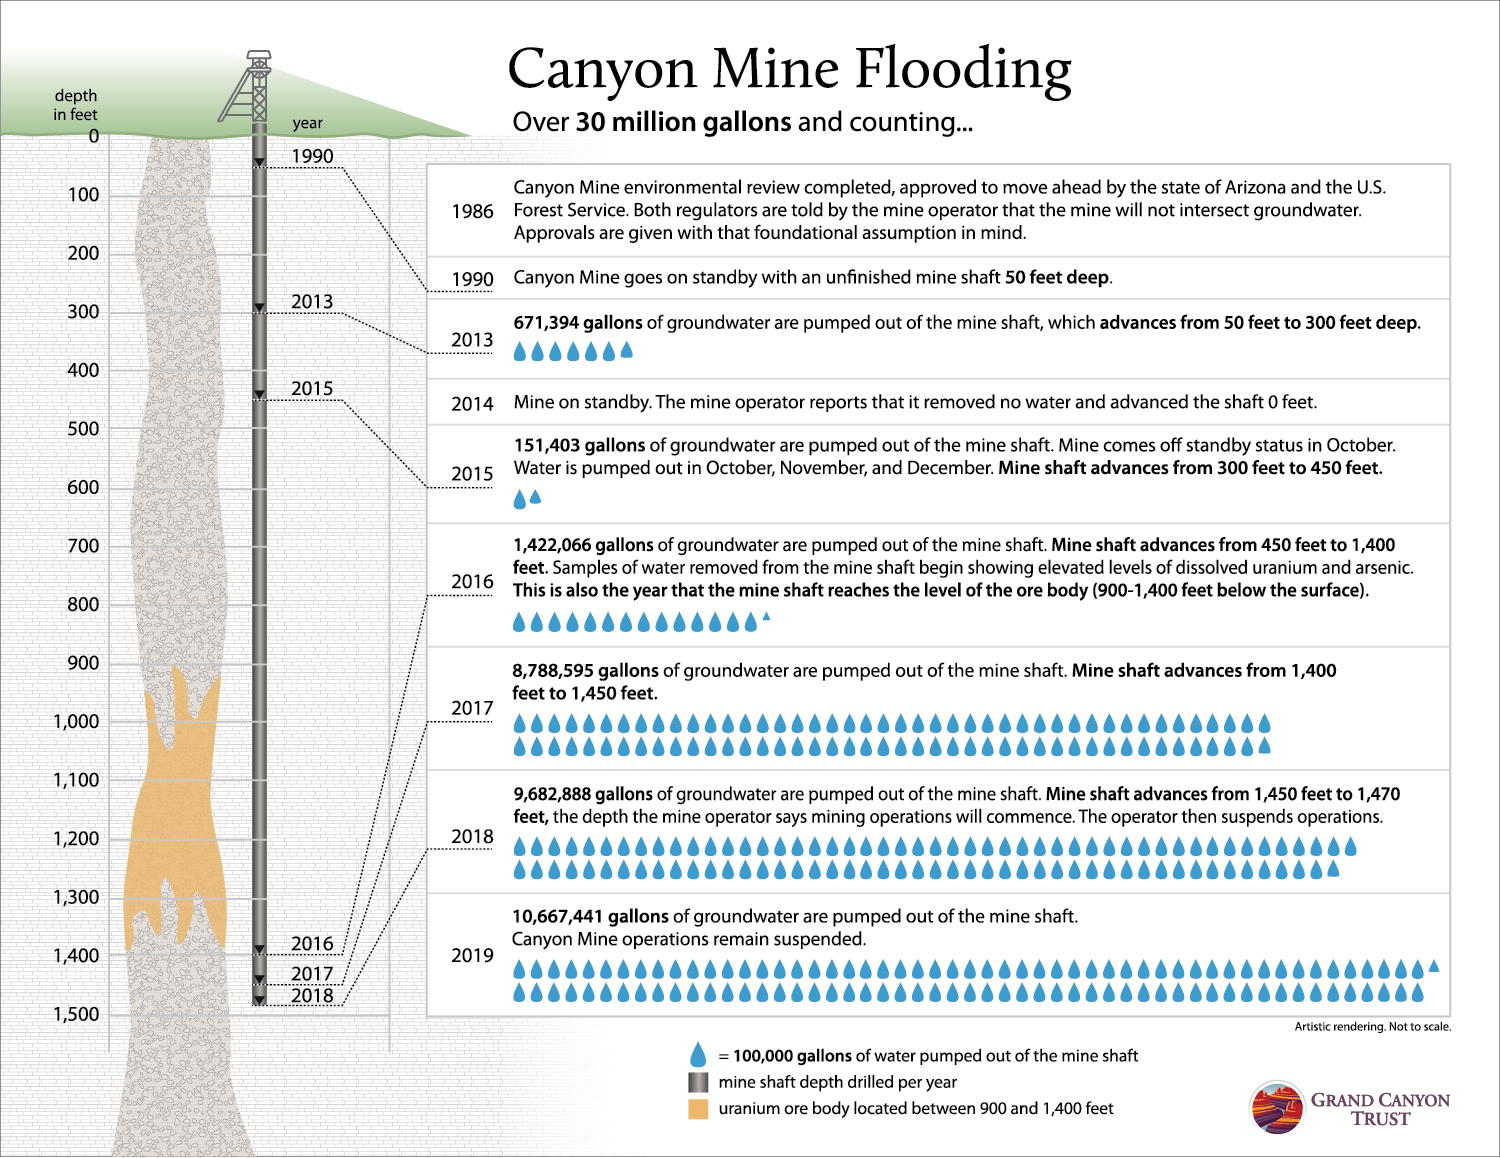 Graphic of flooding at Canyon Mine